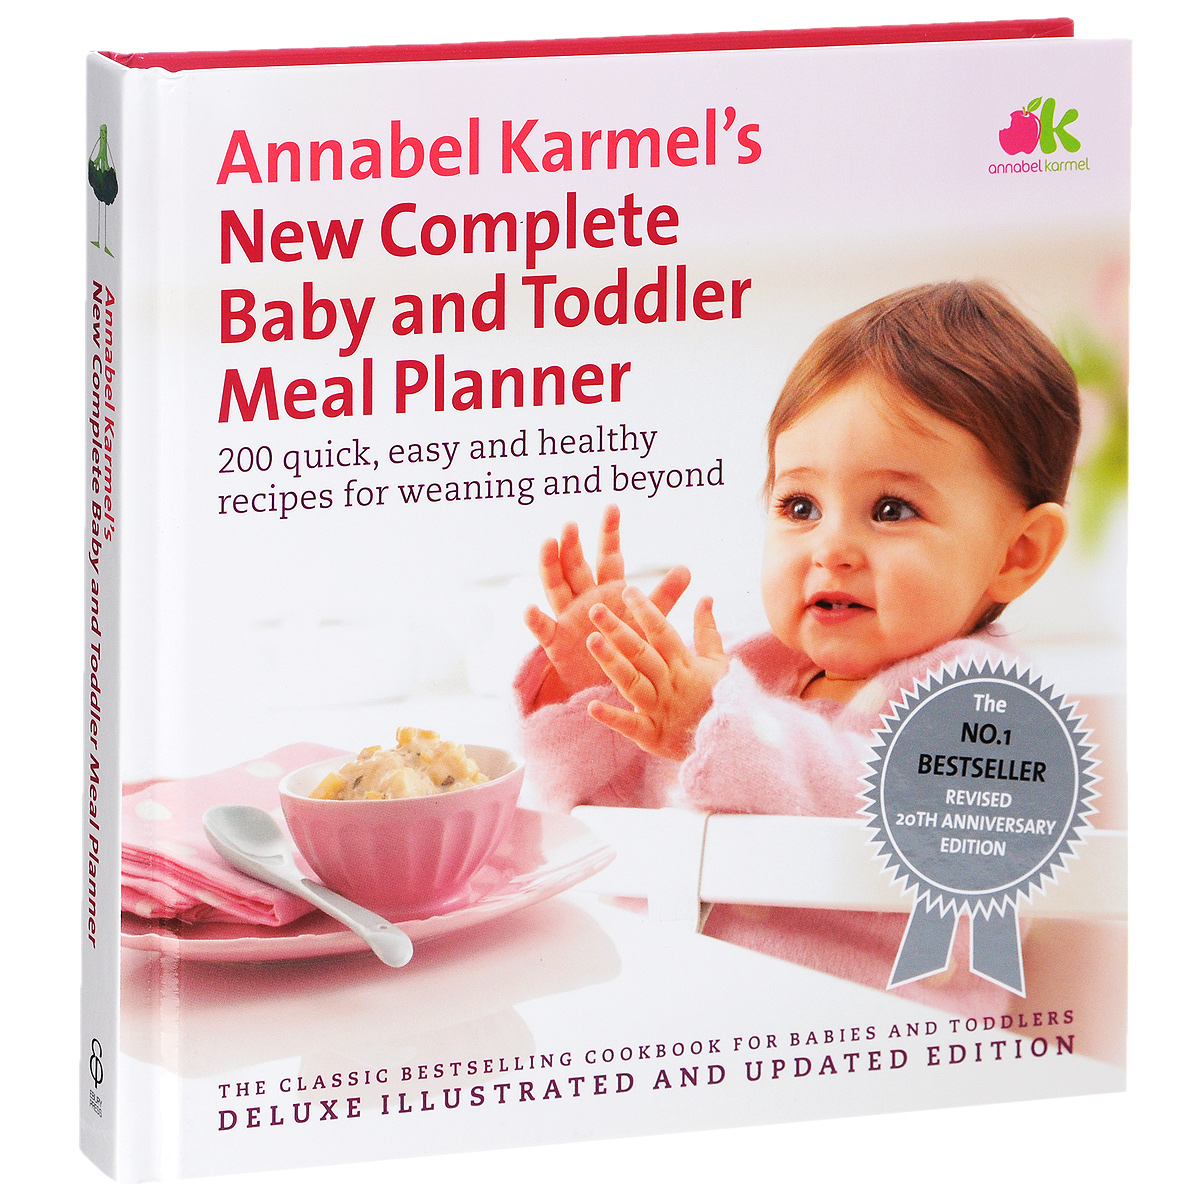 Annabel Karmel's New Complete Baby and Toddler Meal Planner: 200 Quick, Easy, and Healthy Recipes for Weaning and Beyond